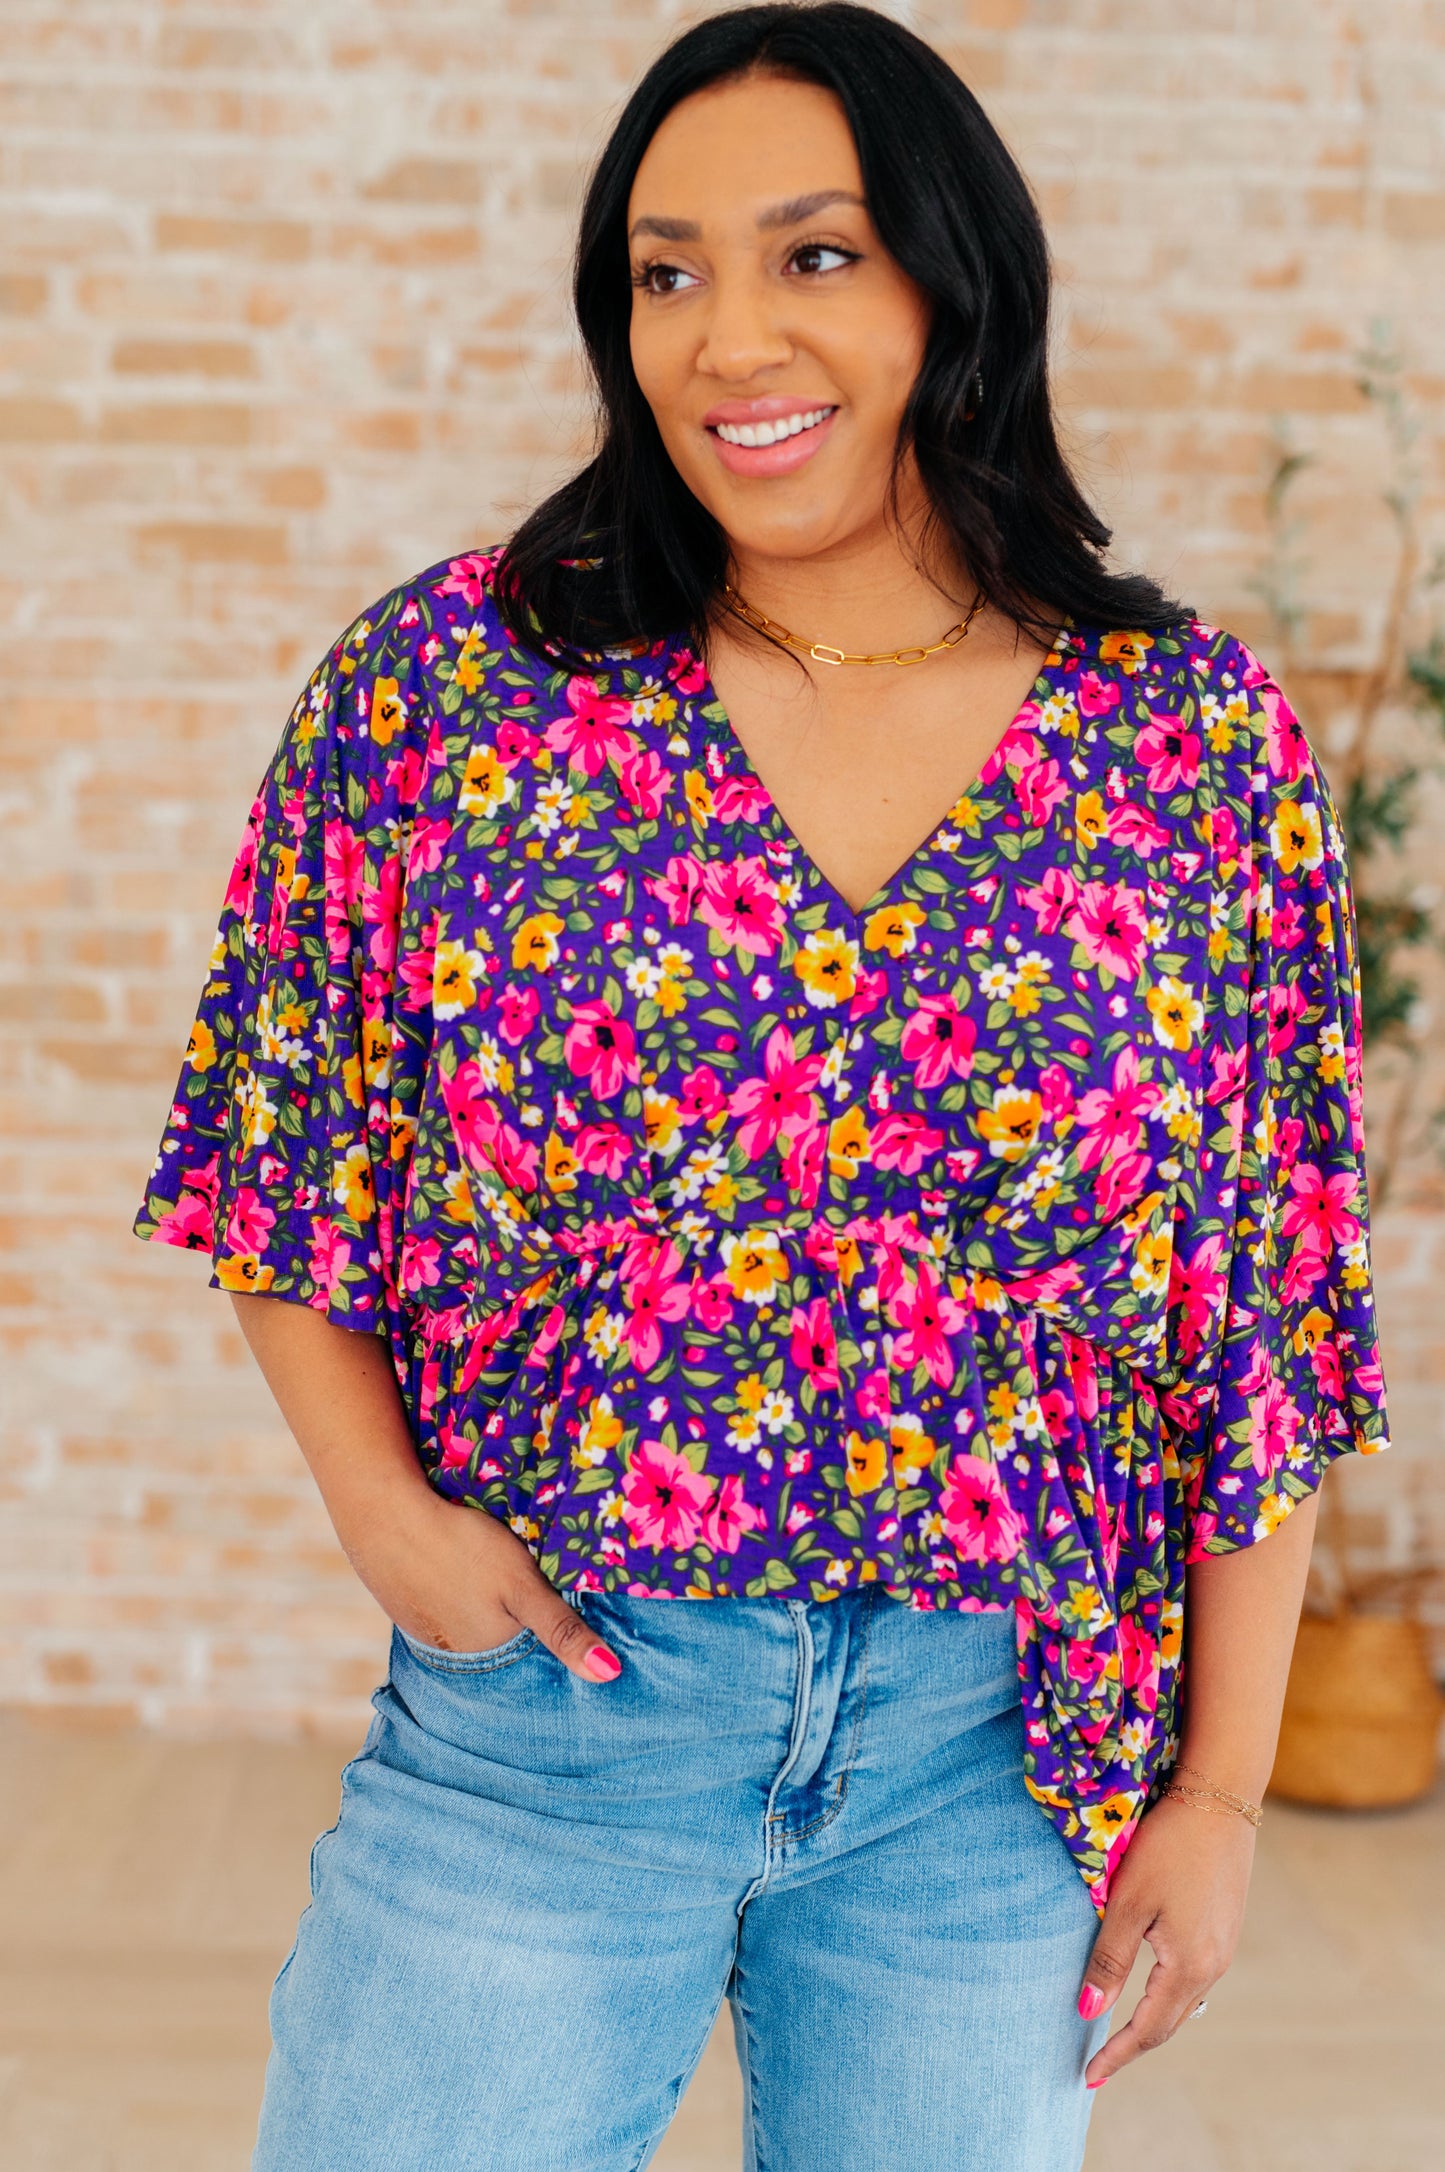 Dreamer Peplum Top in Purple and Pink Floral - Southern Divas Boutique